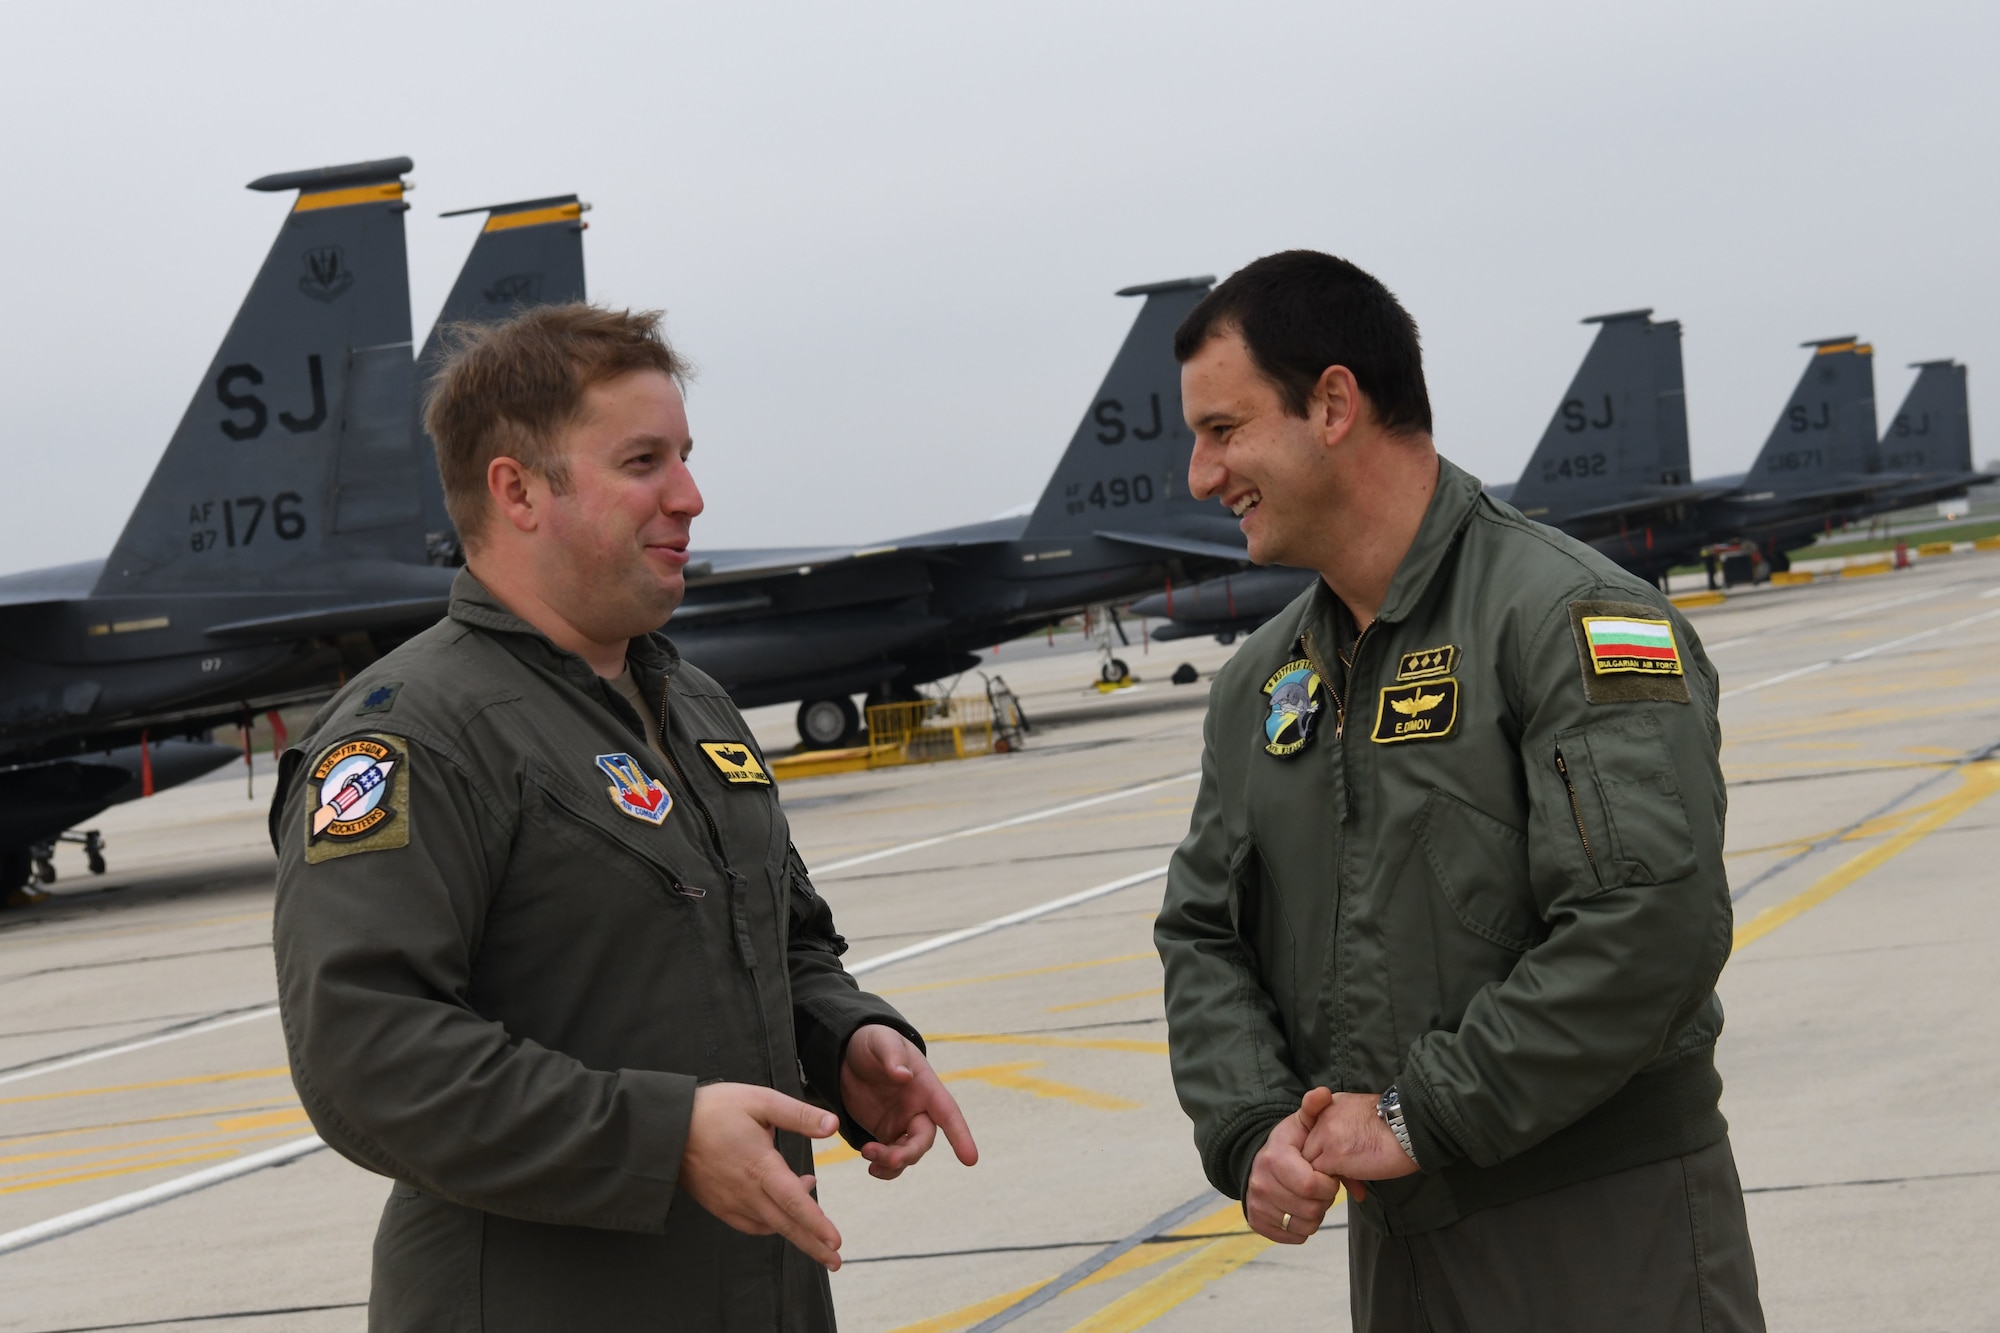 U.S., Bulgarian aircrews “ACE” Castle Forge together